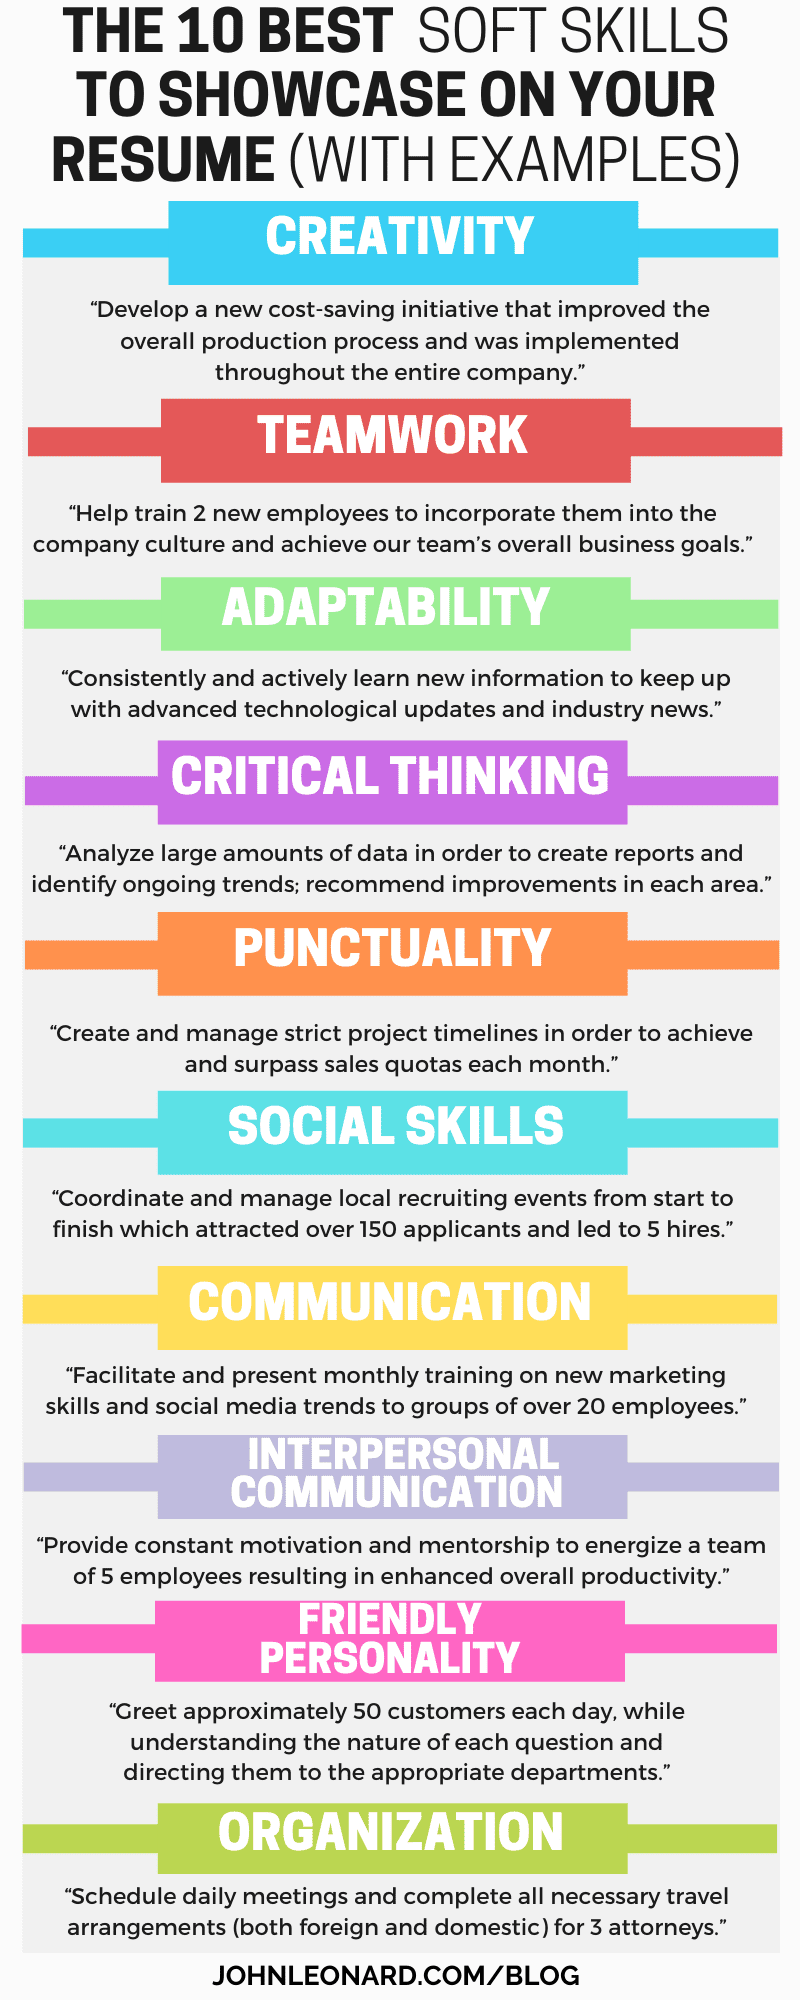 The best soft skills to showcase on your resume-1